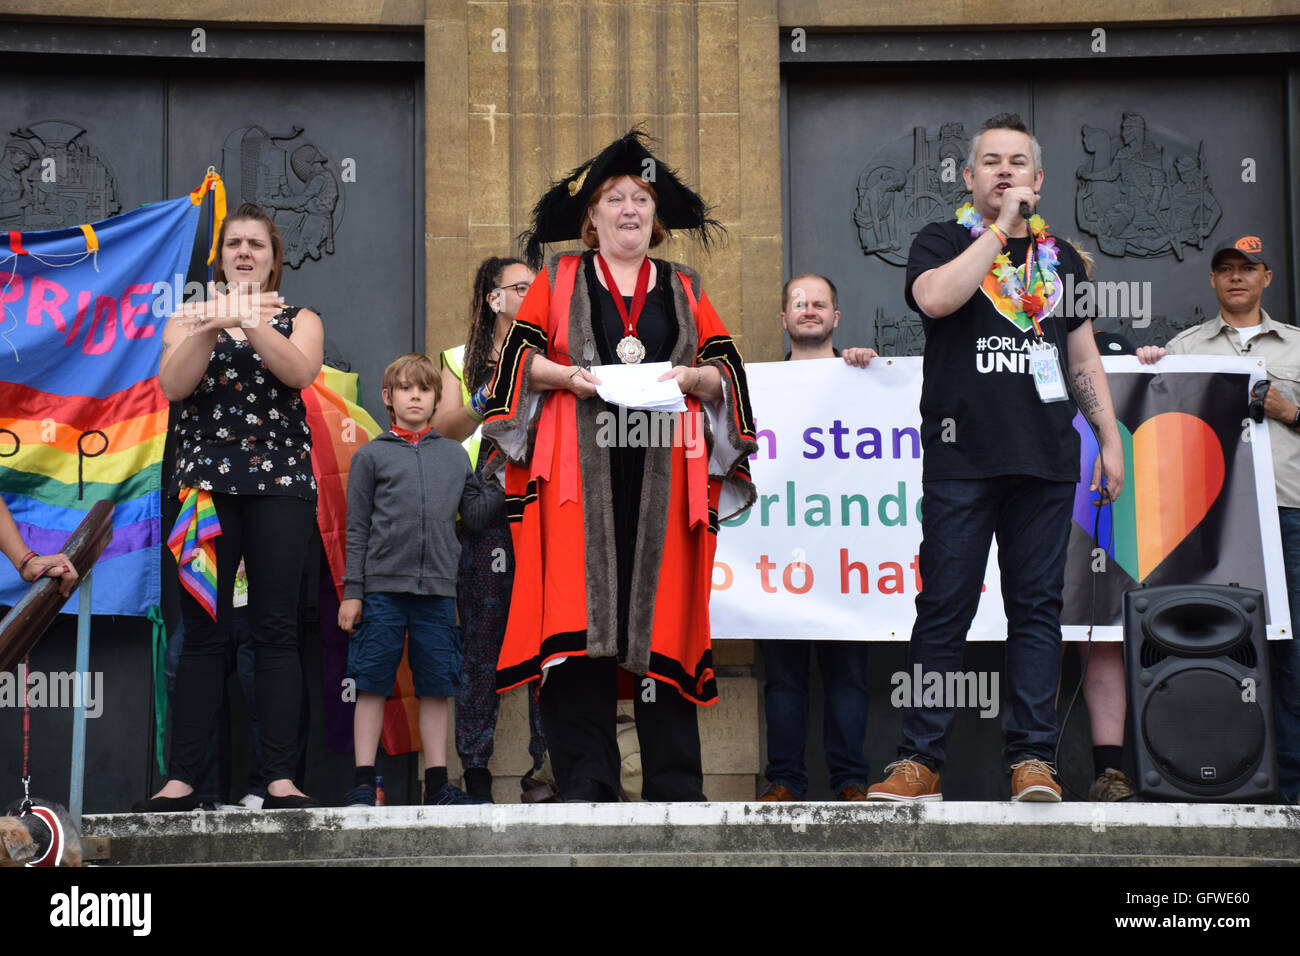 Marion Maxwell, Lord Mayor, with Andy Futter, Chair of Norwich Pride, speaking with signer, Norwich Pride 30 July 2016 UK Stock Photo